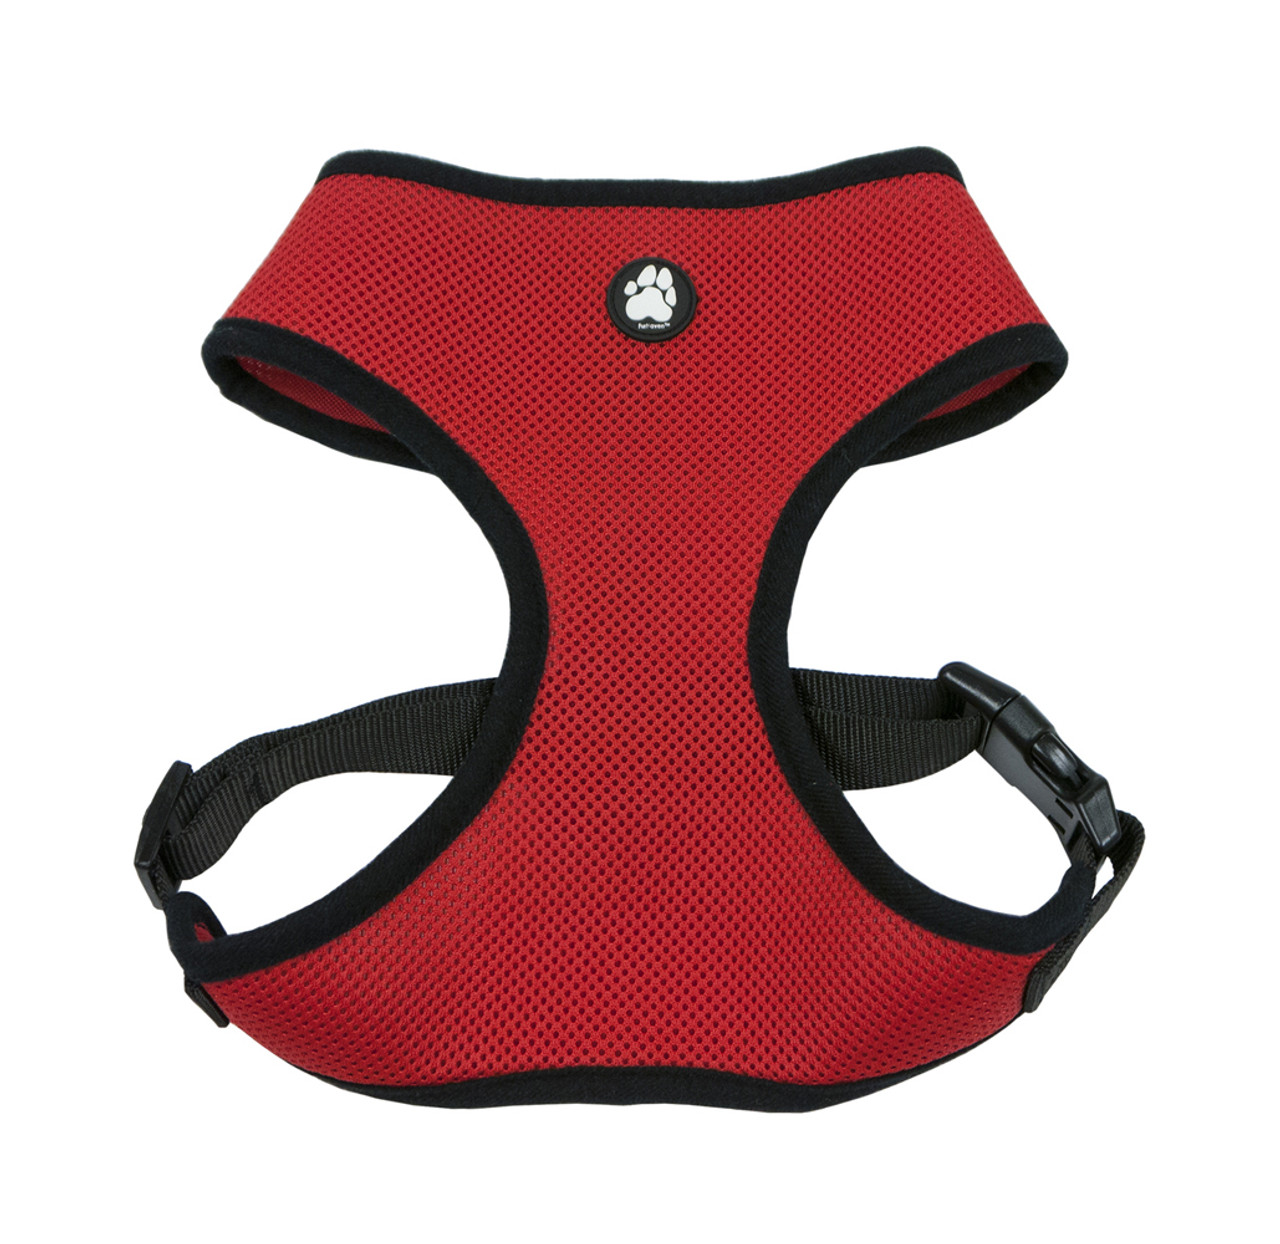 FurHaven™ Soft and Comfy Mesh Dog Harness product image